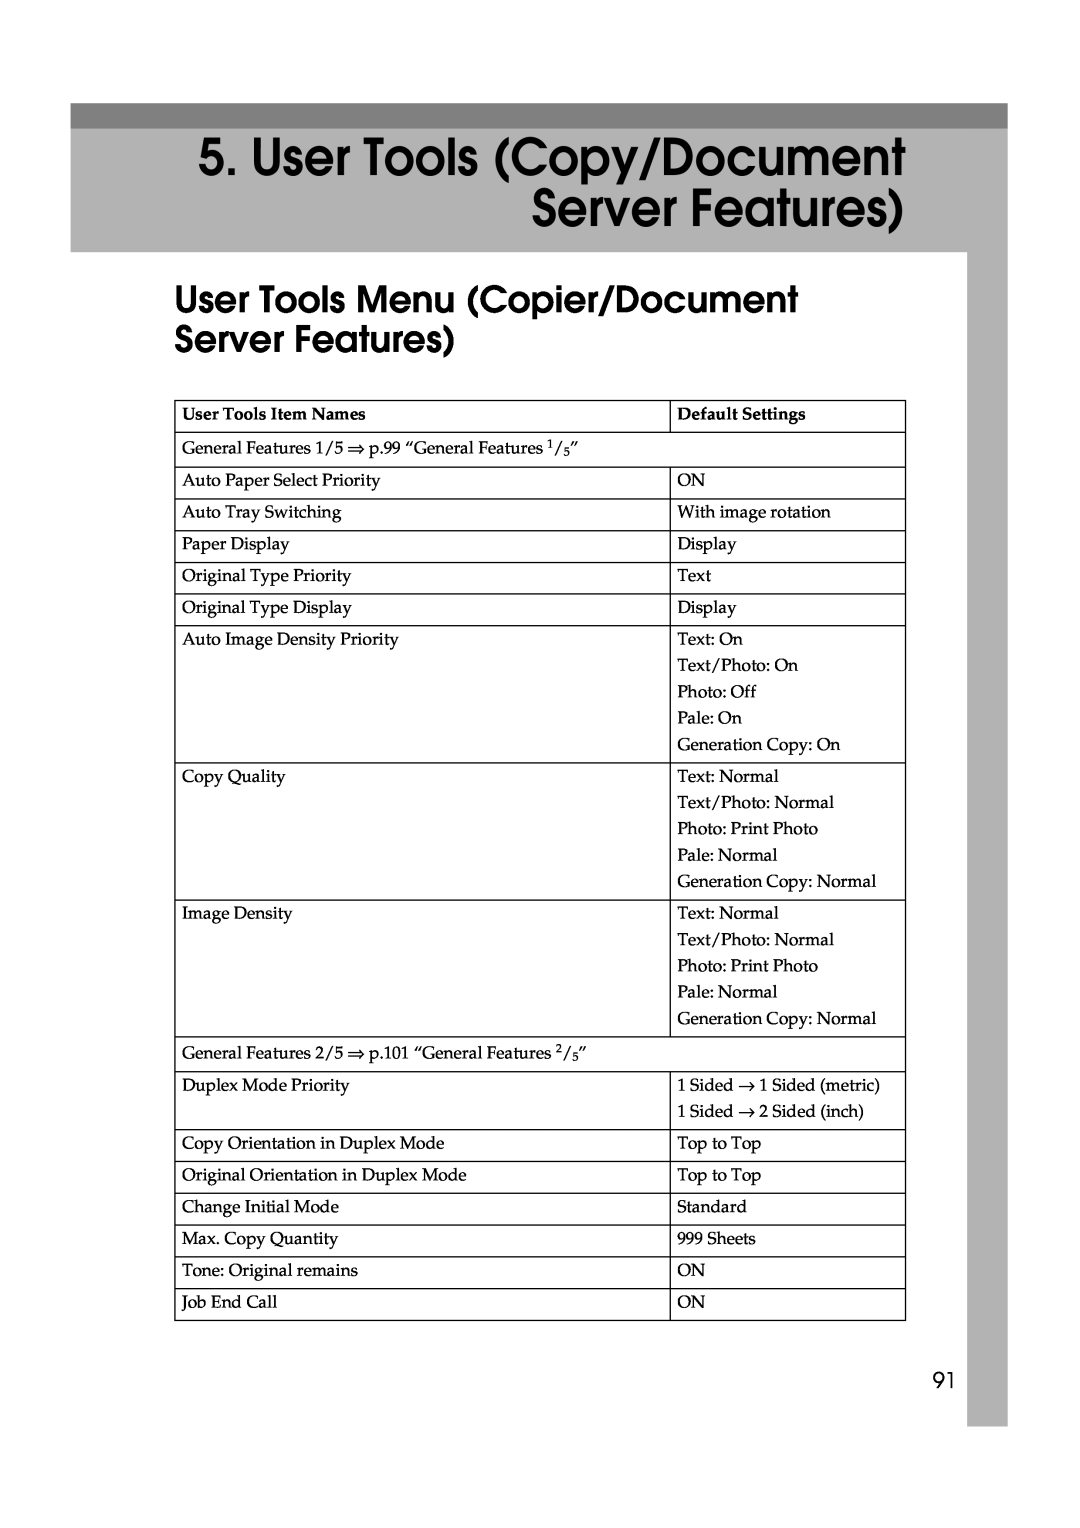 Ricoh IS 2060 User Tools Copy/Document Server Features, User Tools Menu Copier/Document Server Features, Default Settings 